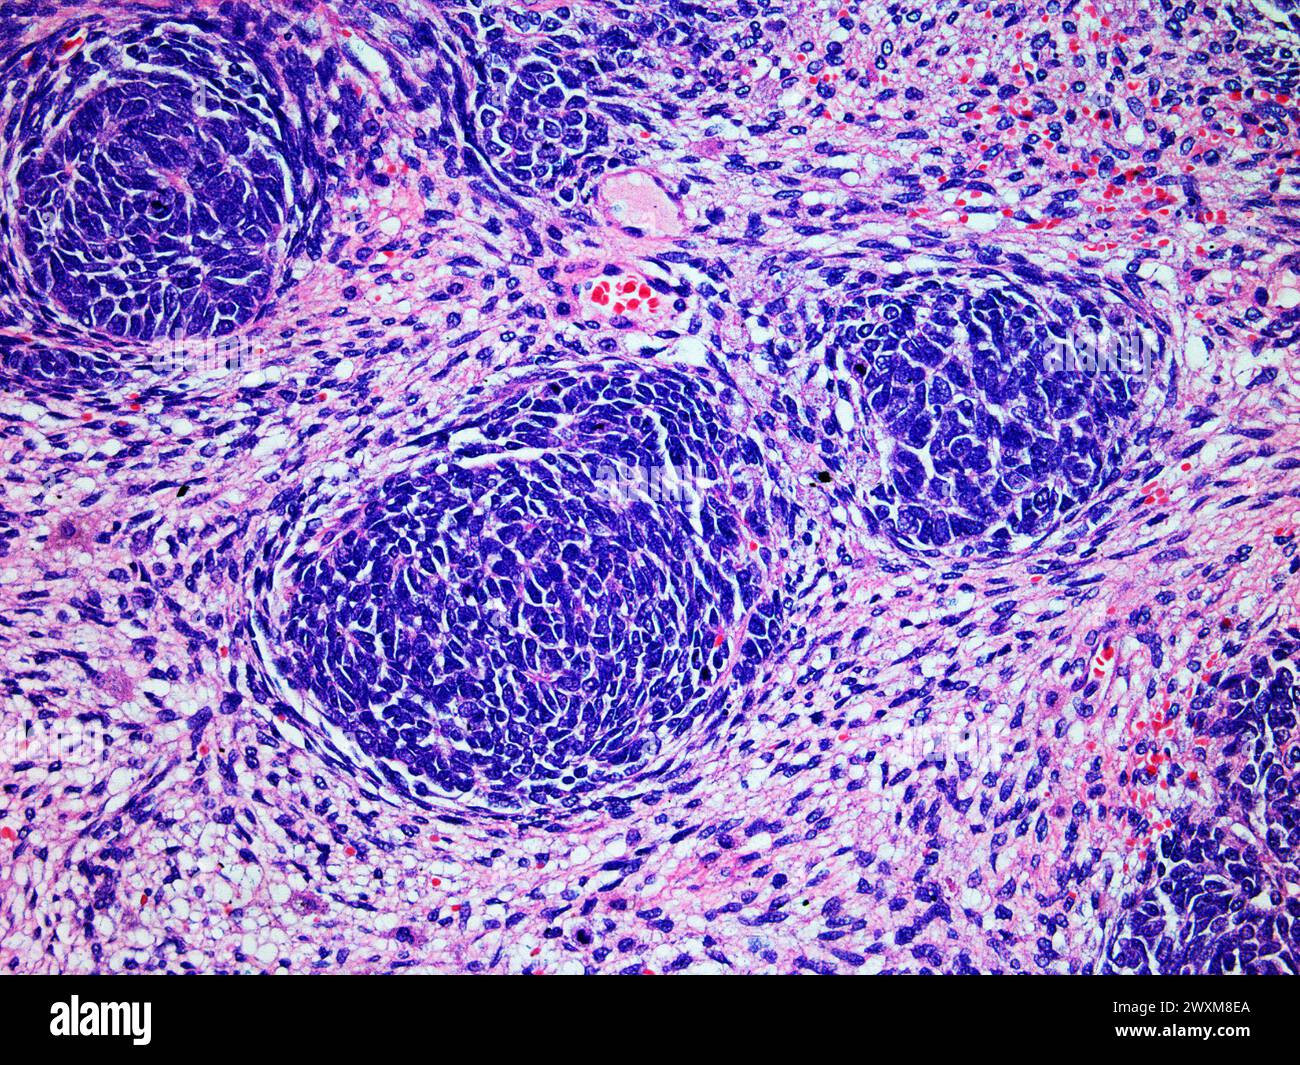 Microscopic Image of a Wilms Tumor or Nephroblastoma of a Childs Kidney Viewed at 200x Magnification with Hematoxylin and Eosin Staining One of the mo Stock Photo